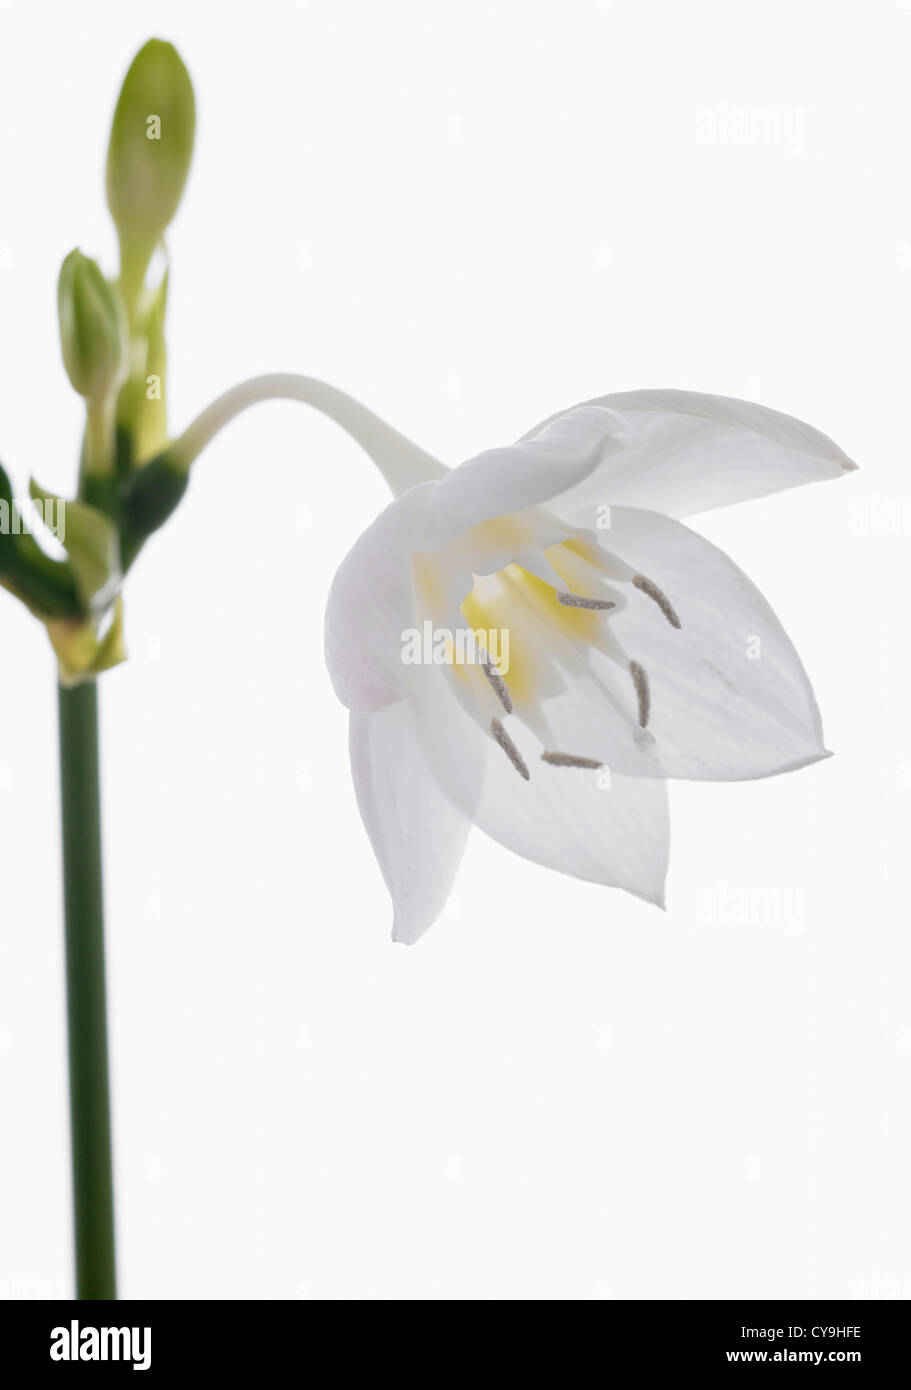 Eucharis amazonica, Amazon lily. Single backlit flower on a stem with buds against a white background Stock Photo